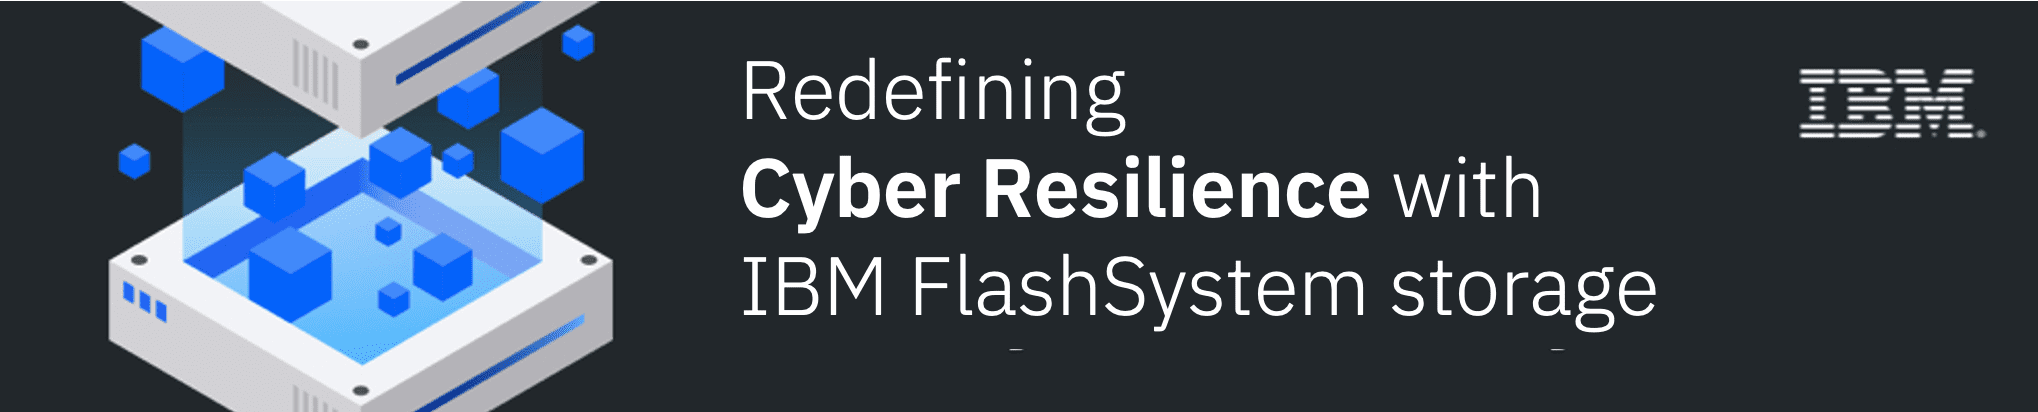 , Redefining Cyber Resilience with IBM FlashSystem Announcement